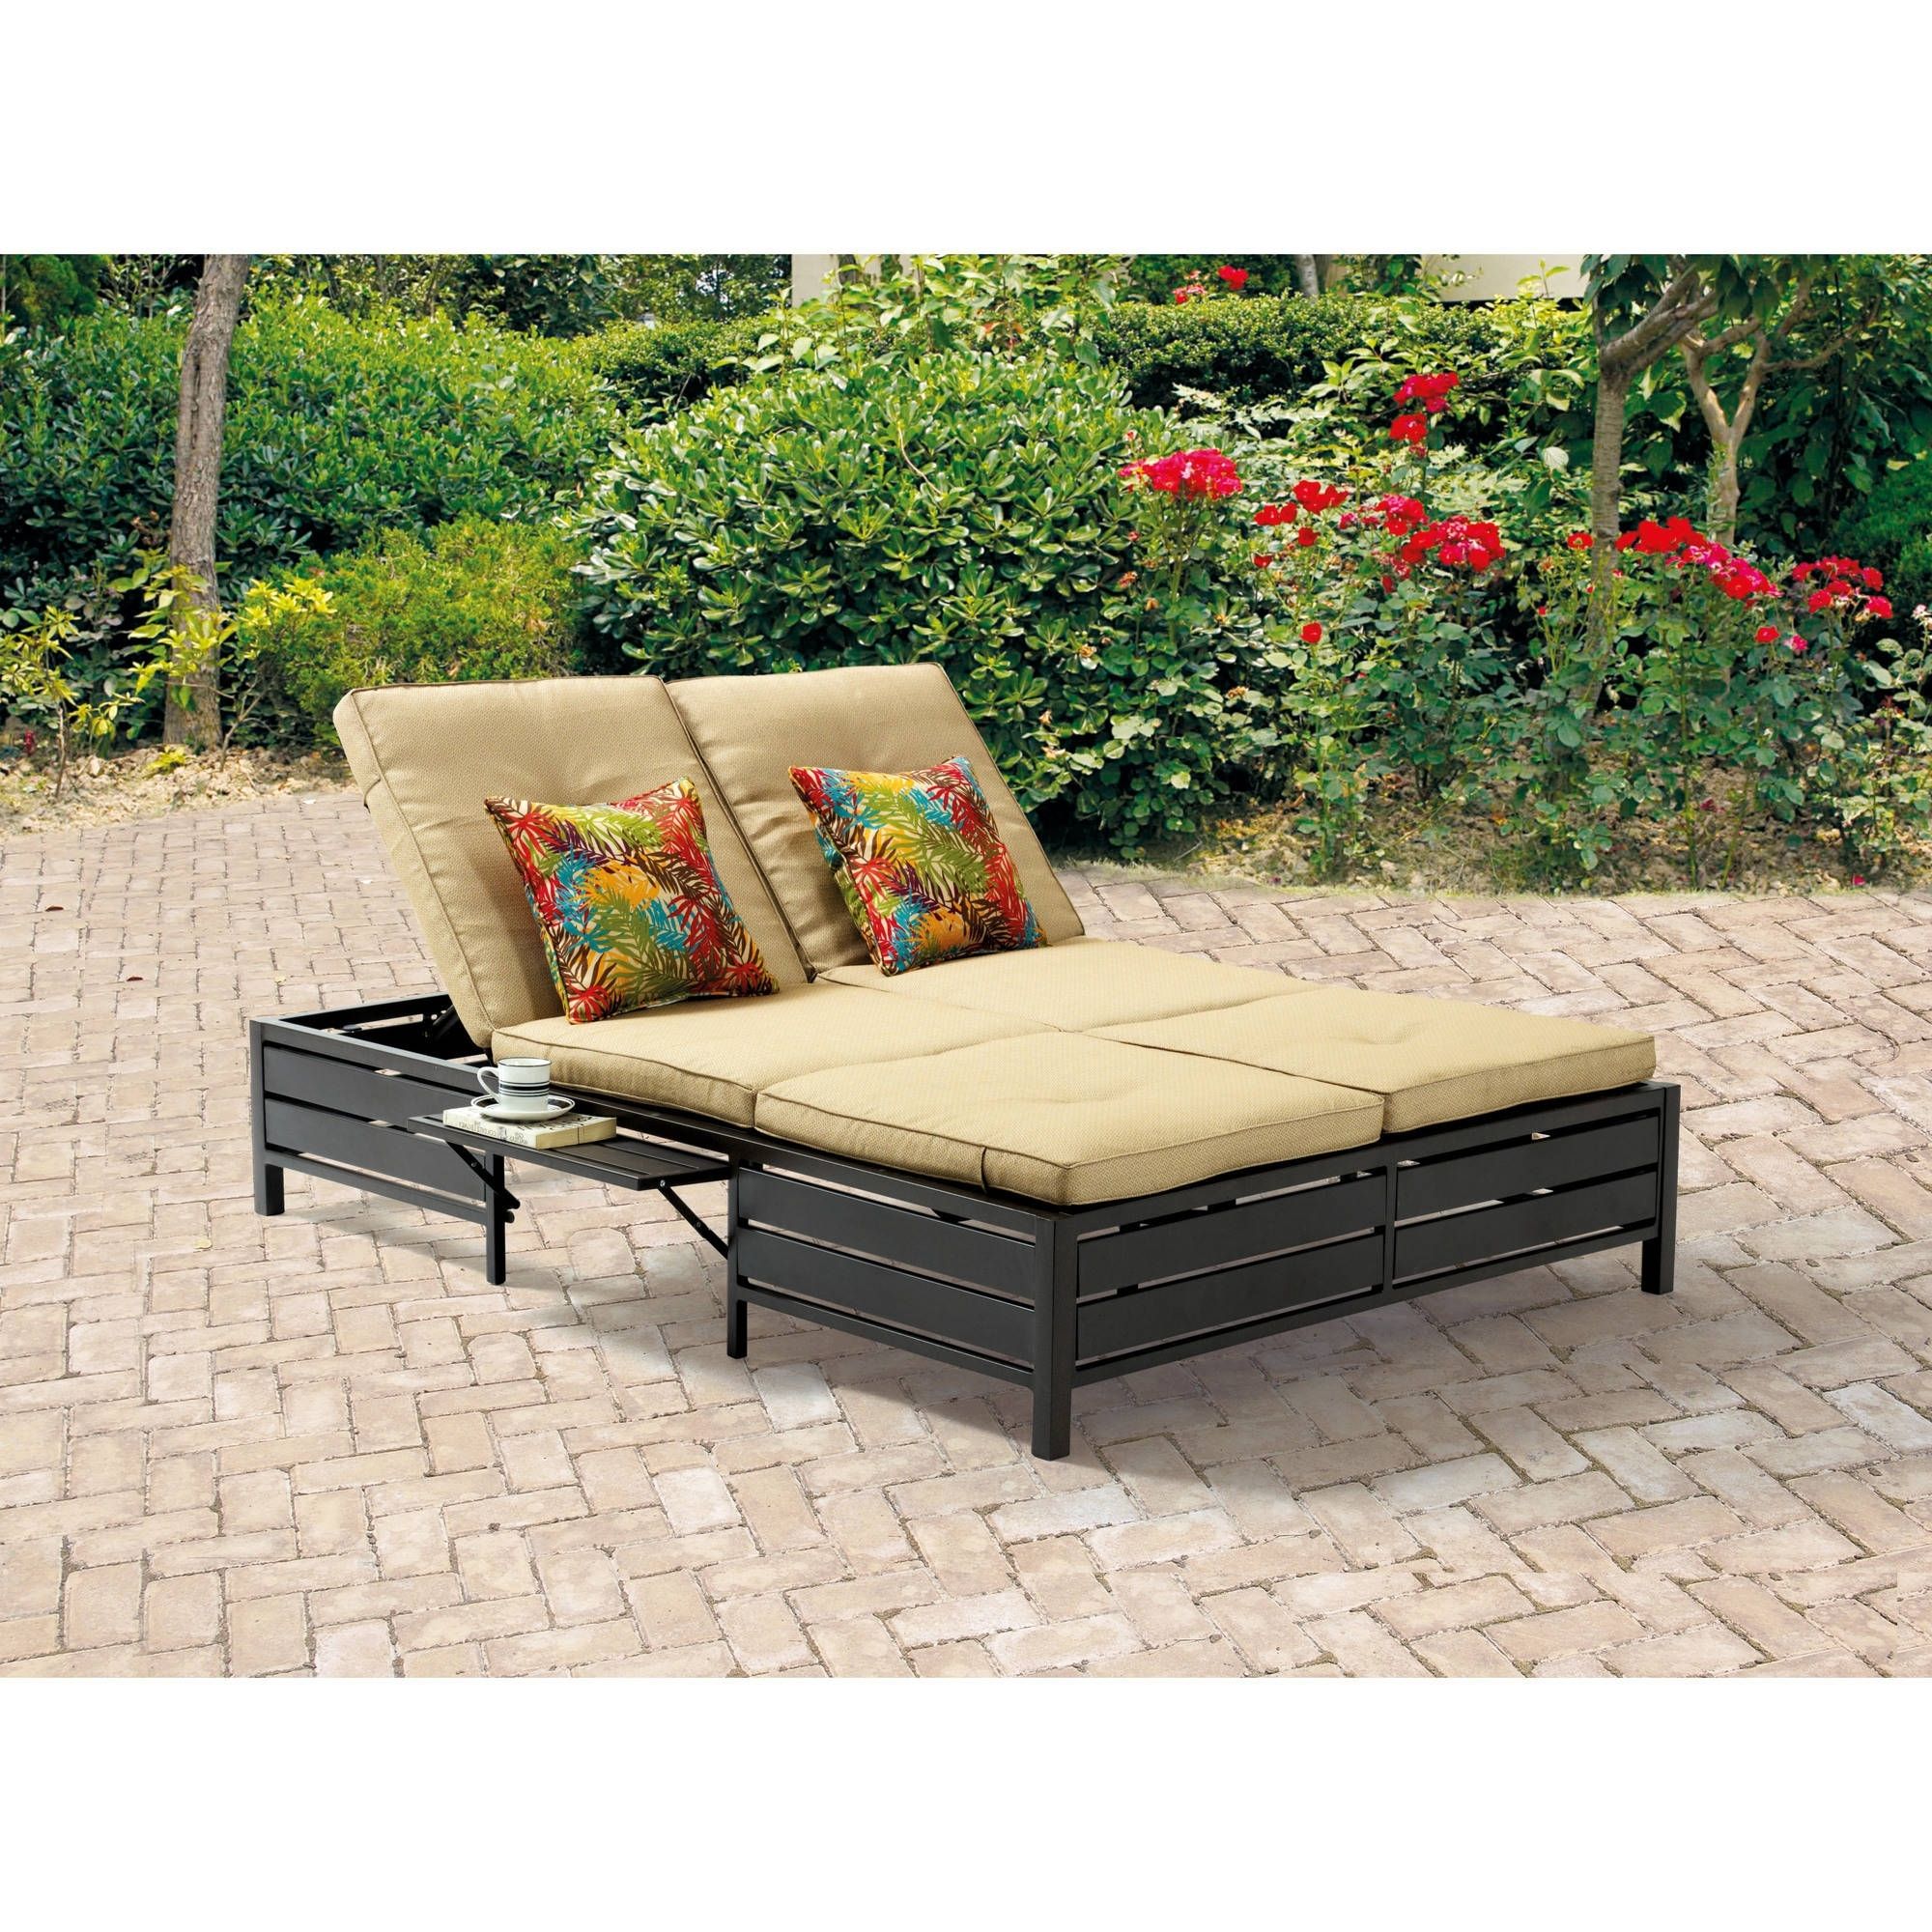 Most Popular Outdoor Double Chaise Lounges Within Mainstays Outdoor Double Chaise Lounger, Tan, Seats 2 – Walmart (View 12 of 15)